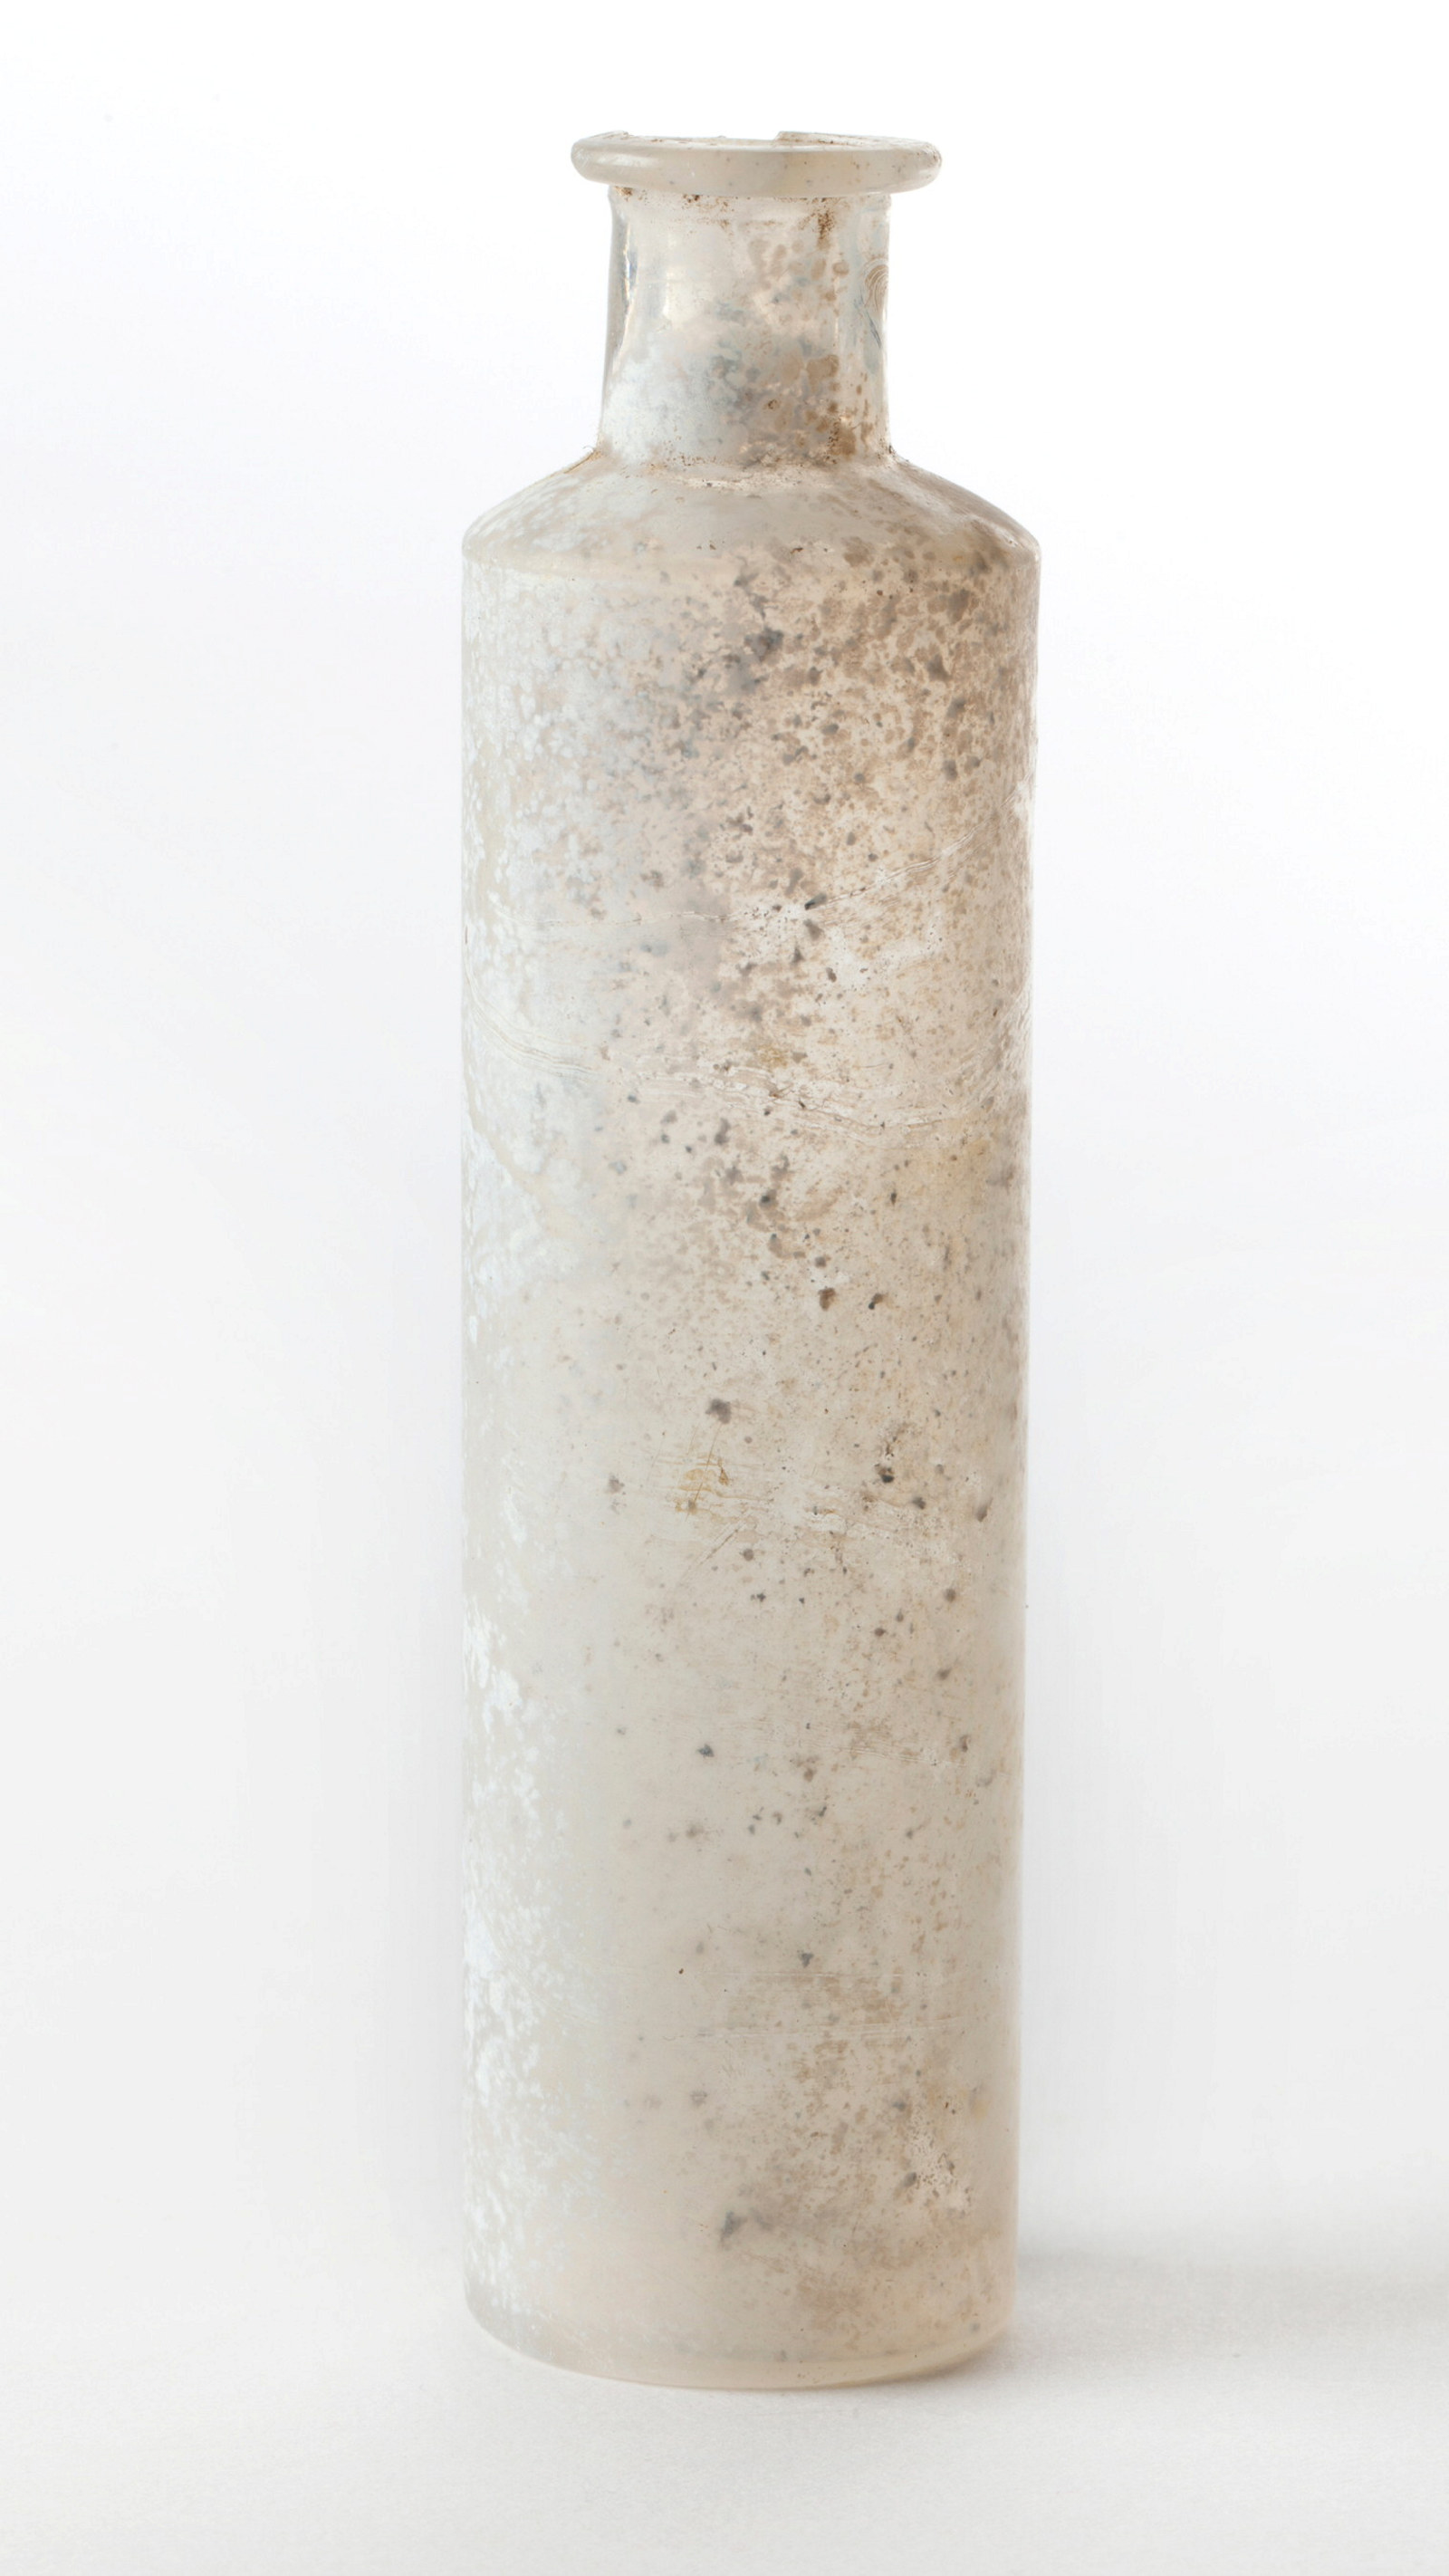 Tall glass bottle with discoloured surface.